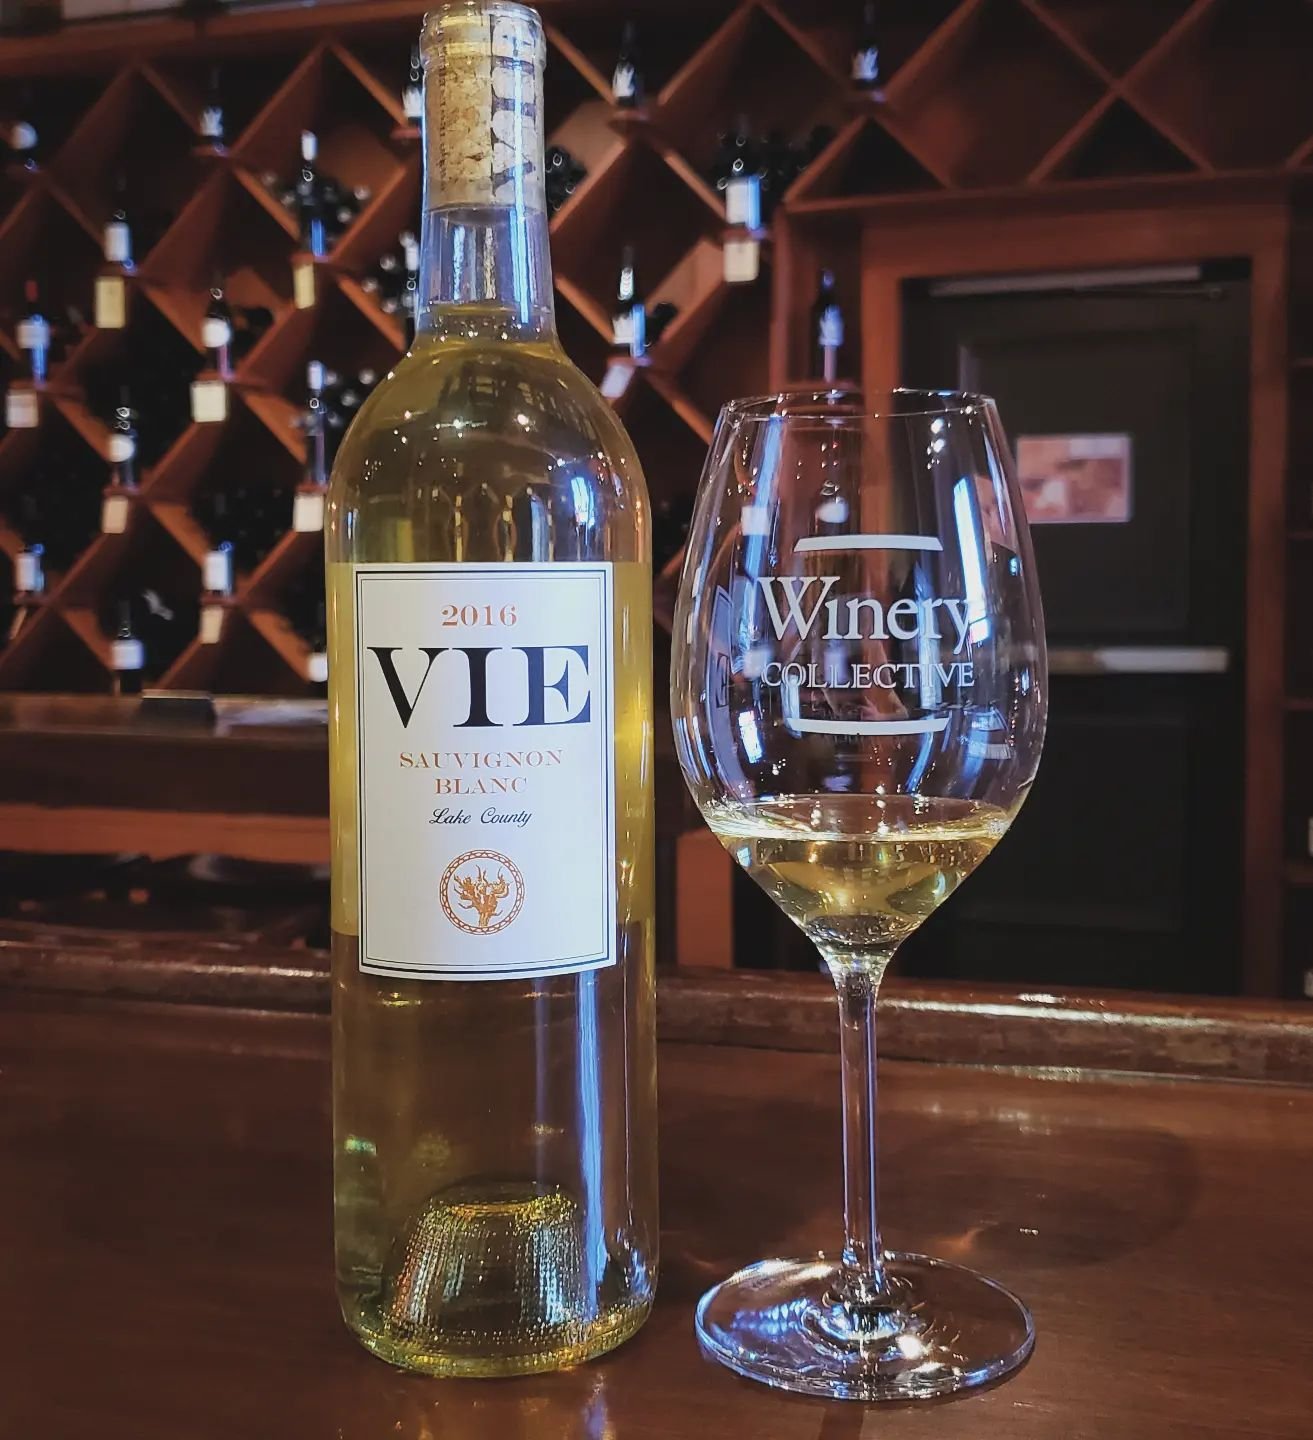 ➡️ Our 2016 Sauvignon Blanc (98 points), is a crisp, clean refreshing wine .
Notes: Hints of guava and white peach on the nose.
Bright green apple and lime on the palate.
Ideal for the spring and summer time.
Cheers

#winerycollectivesf
#fishermanswh